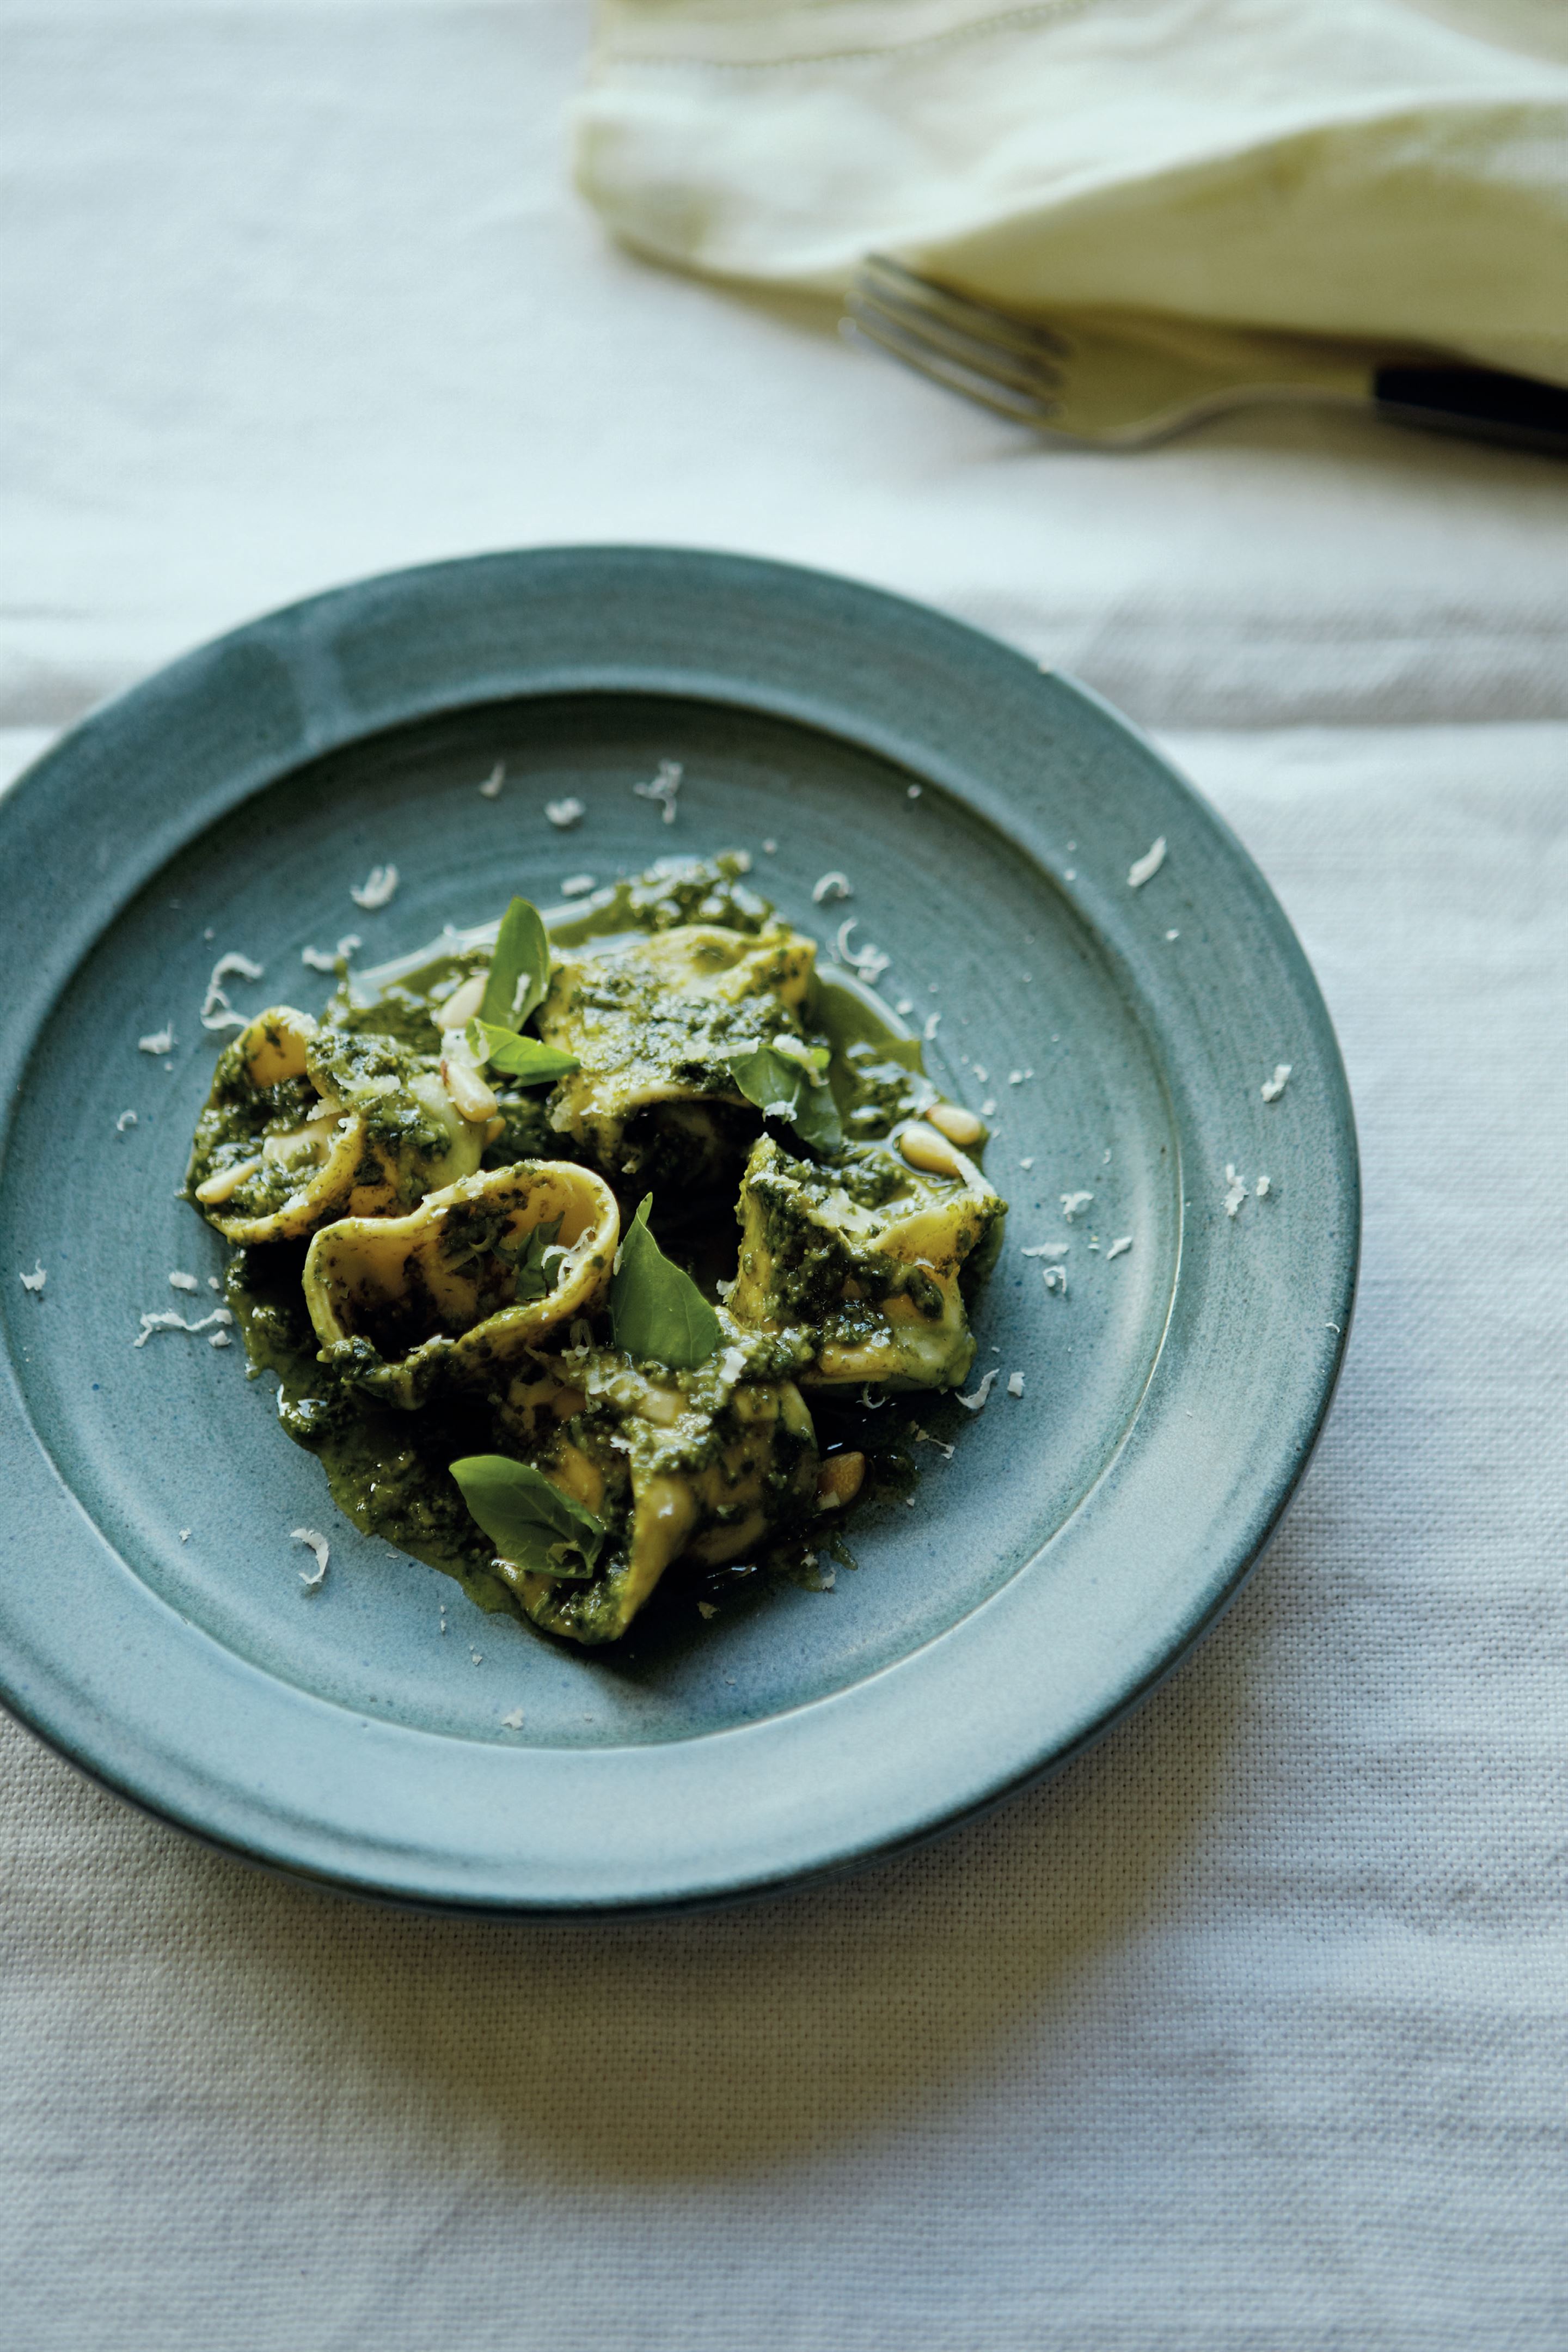 Basil tortellini with ricotta and pine nuts